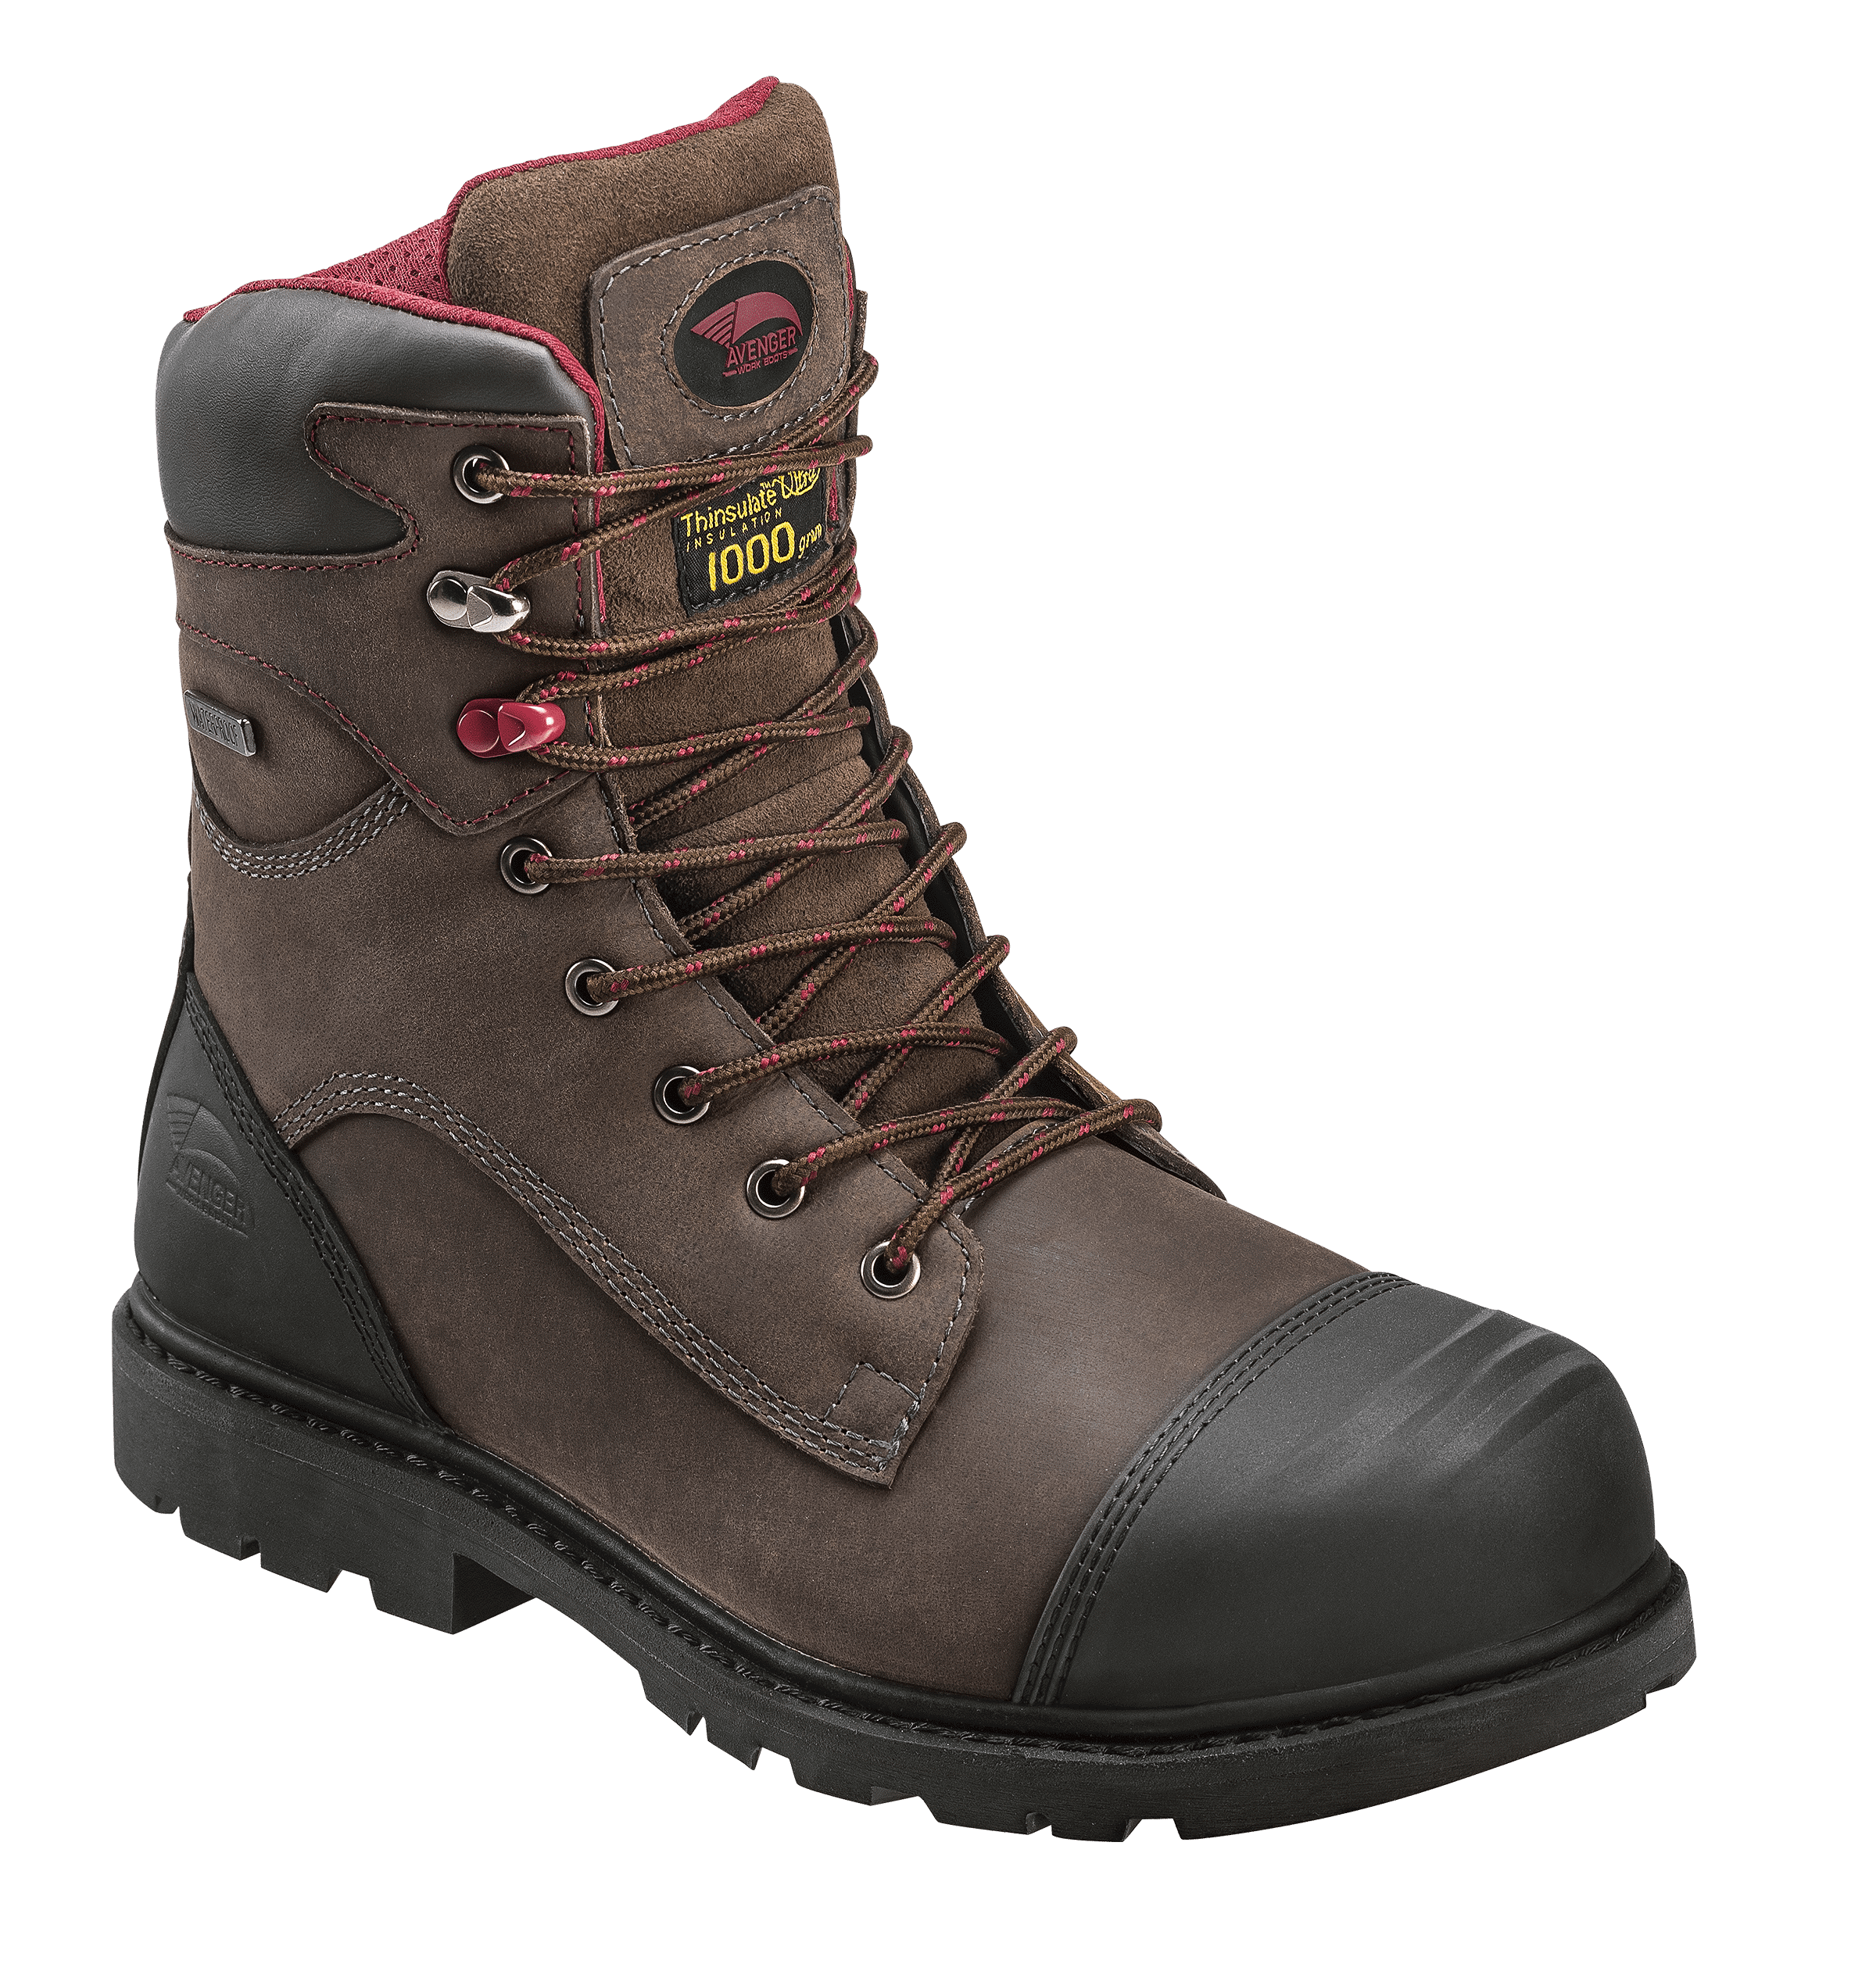 mens tall work boots